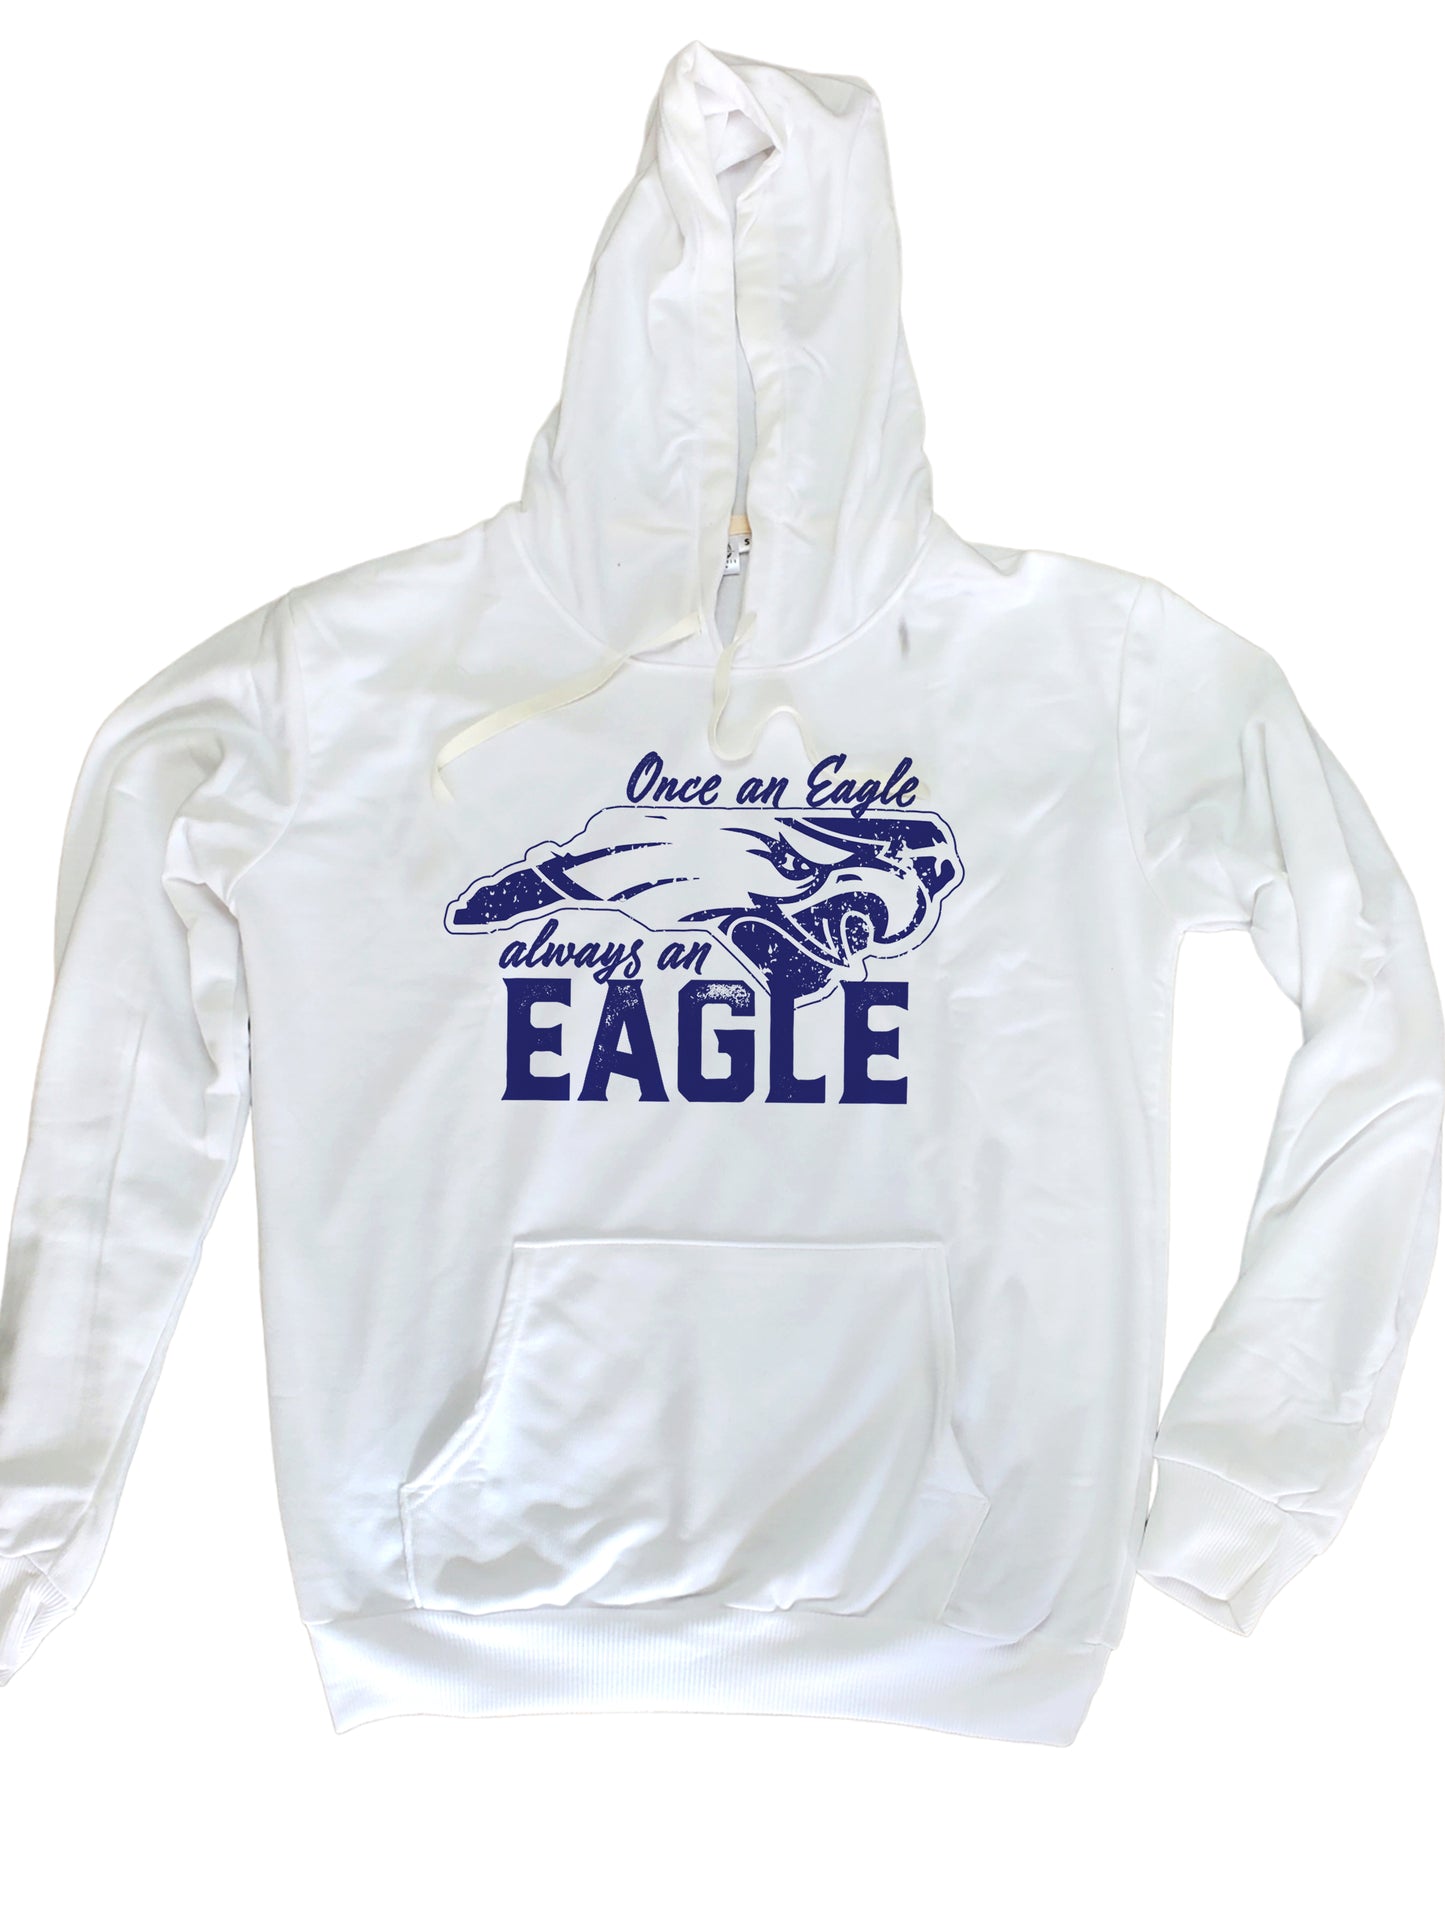 Once an Eagle always an Eagle white sweatshirt, 100% polyester hoodie